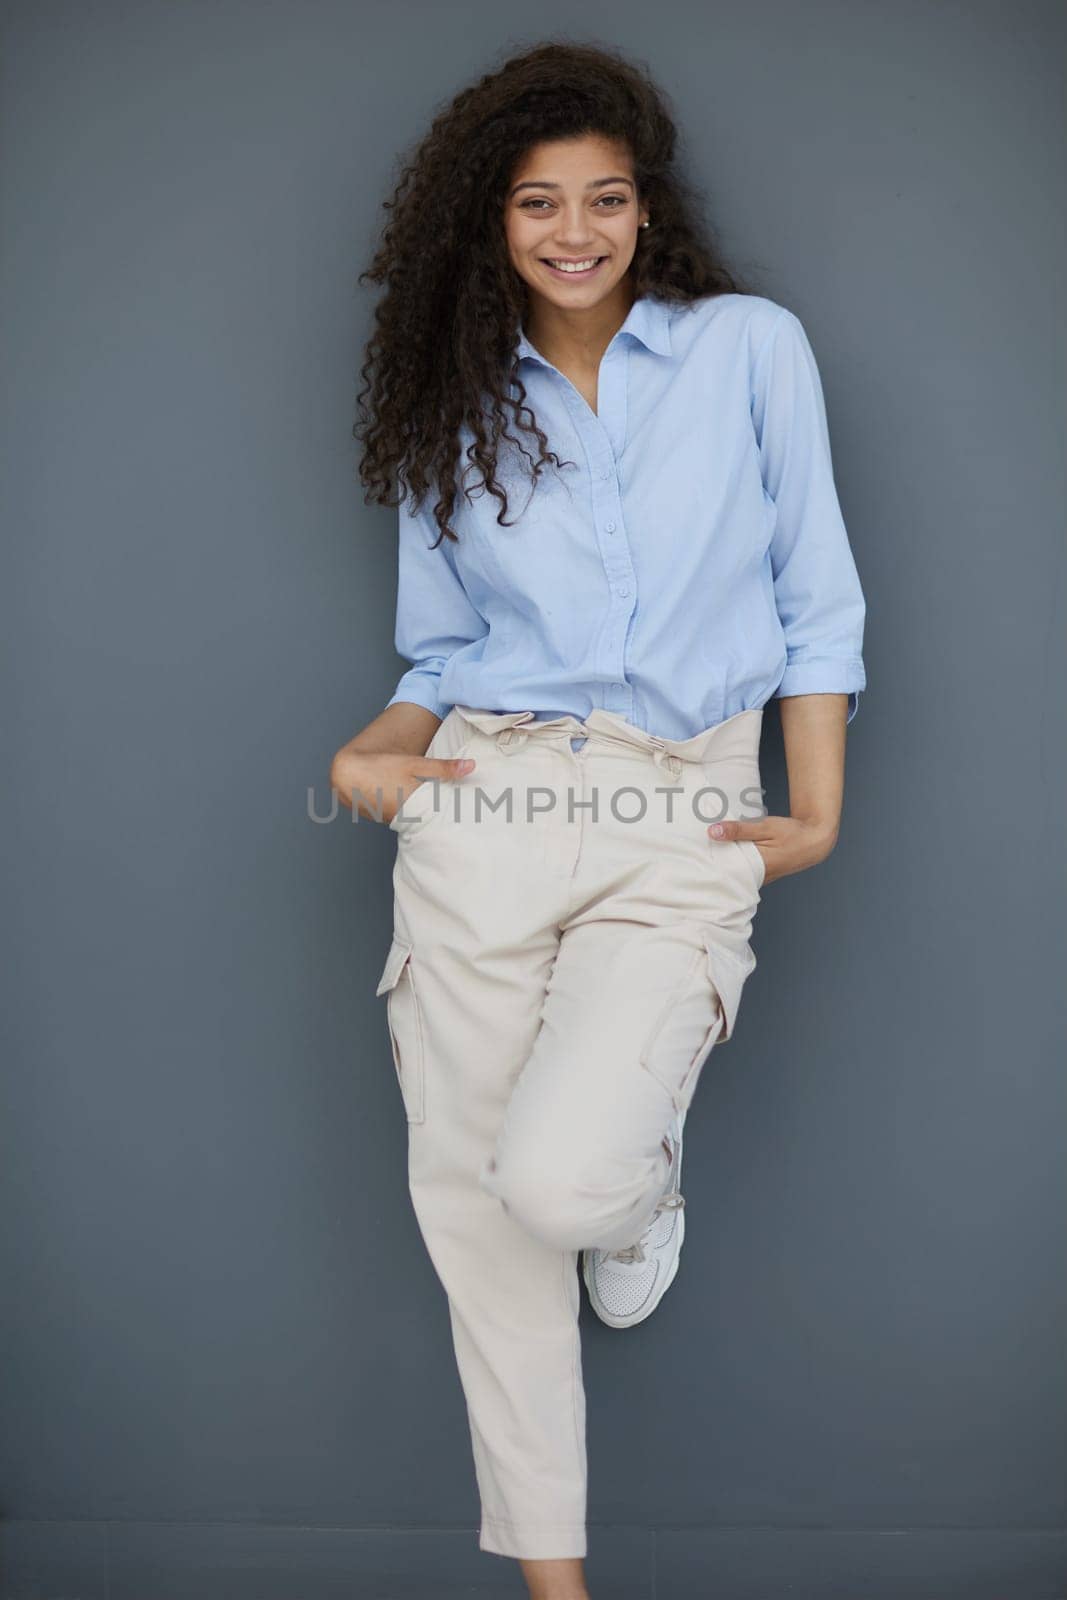 Photo of cheerful self-assured lady folded arms wear blue shirt grey color background